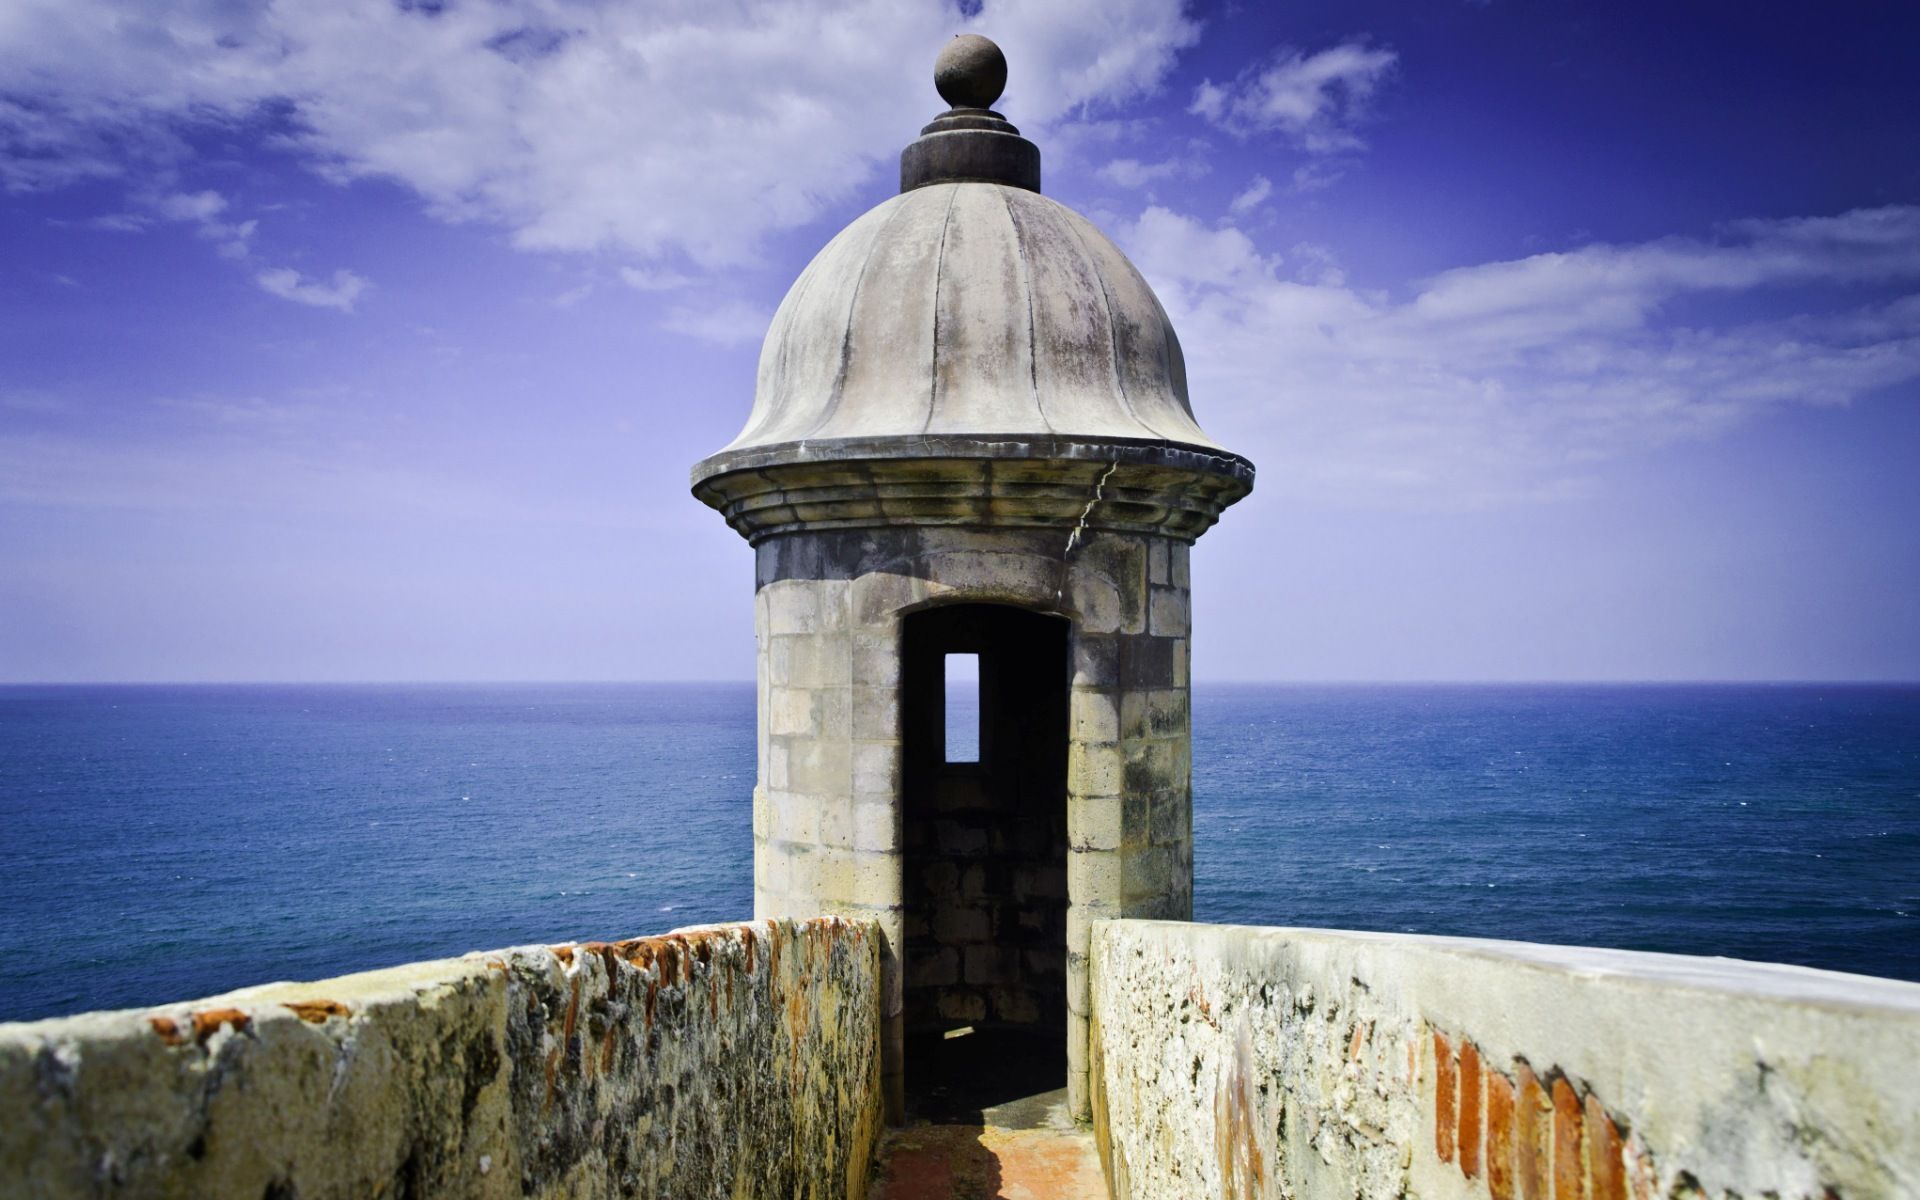 Puerto Rico Images Wallpaper 57 images